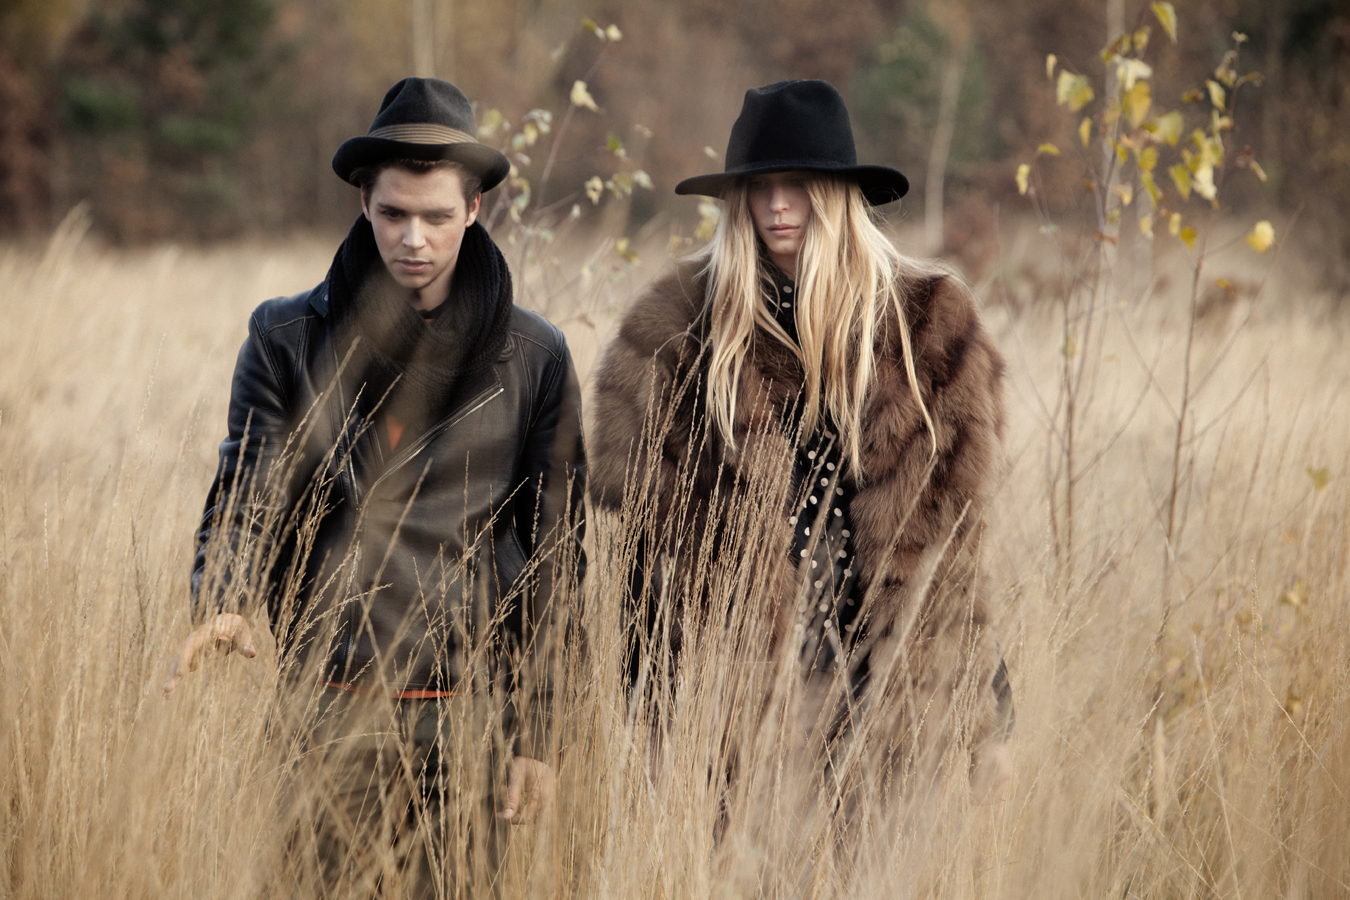 Marla Fabri and Nicolas Lagiere by John Hennequin for CHASSEUR MAGAZINE